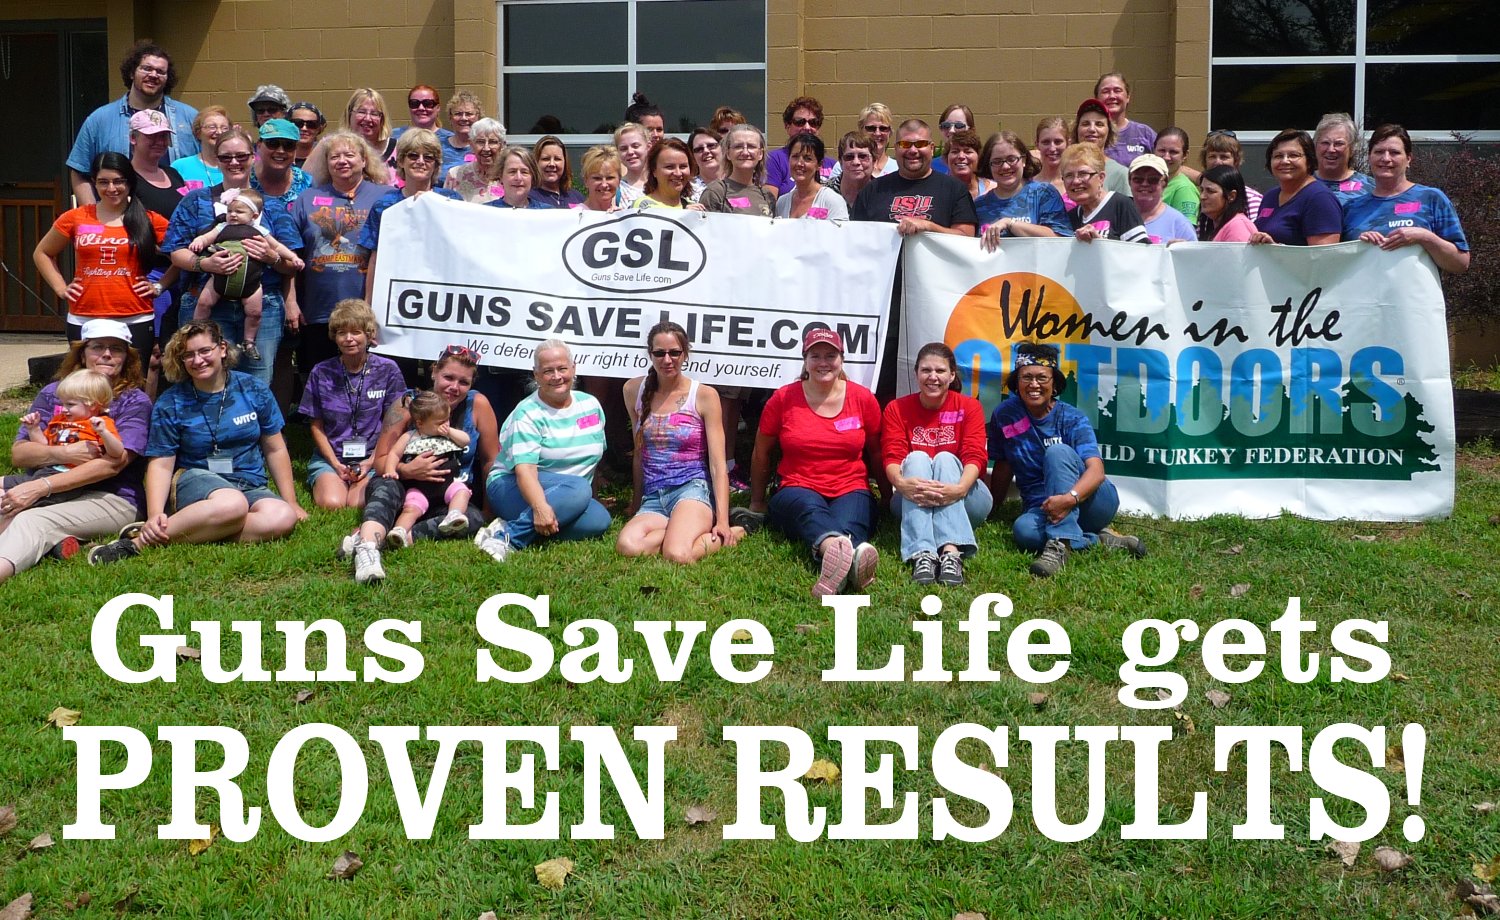 GUNS SAVE LIFE GETS RESULTS: GSL provides rimfire ammo for well-attended Wo...